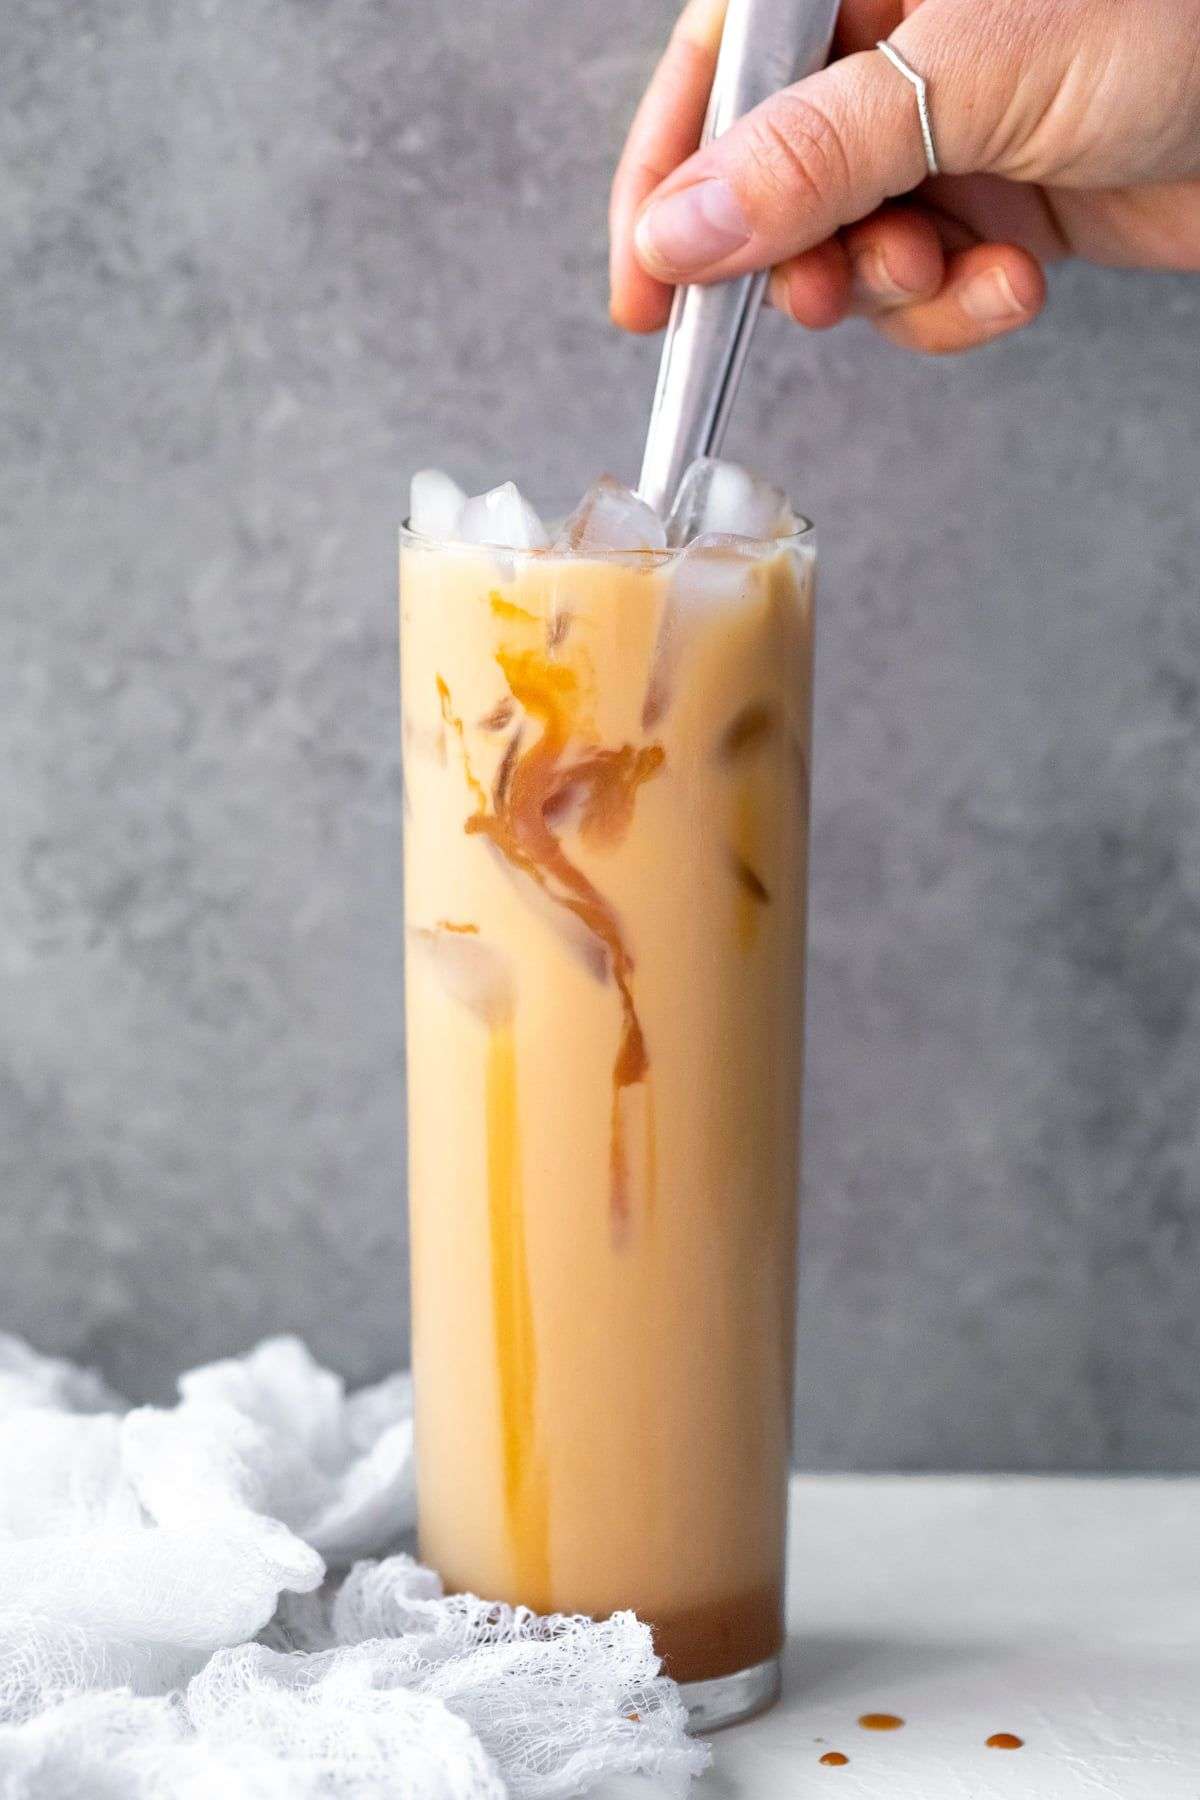 How To Make The Best Caramel Iced Coffee At Home in 2020